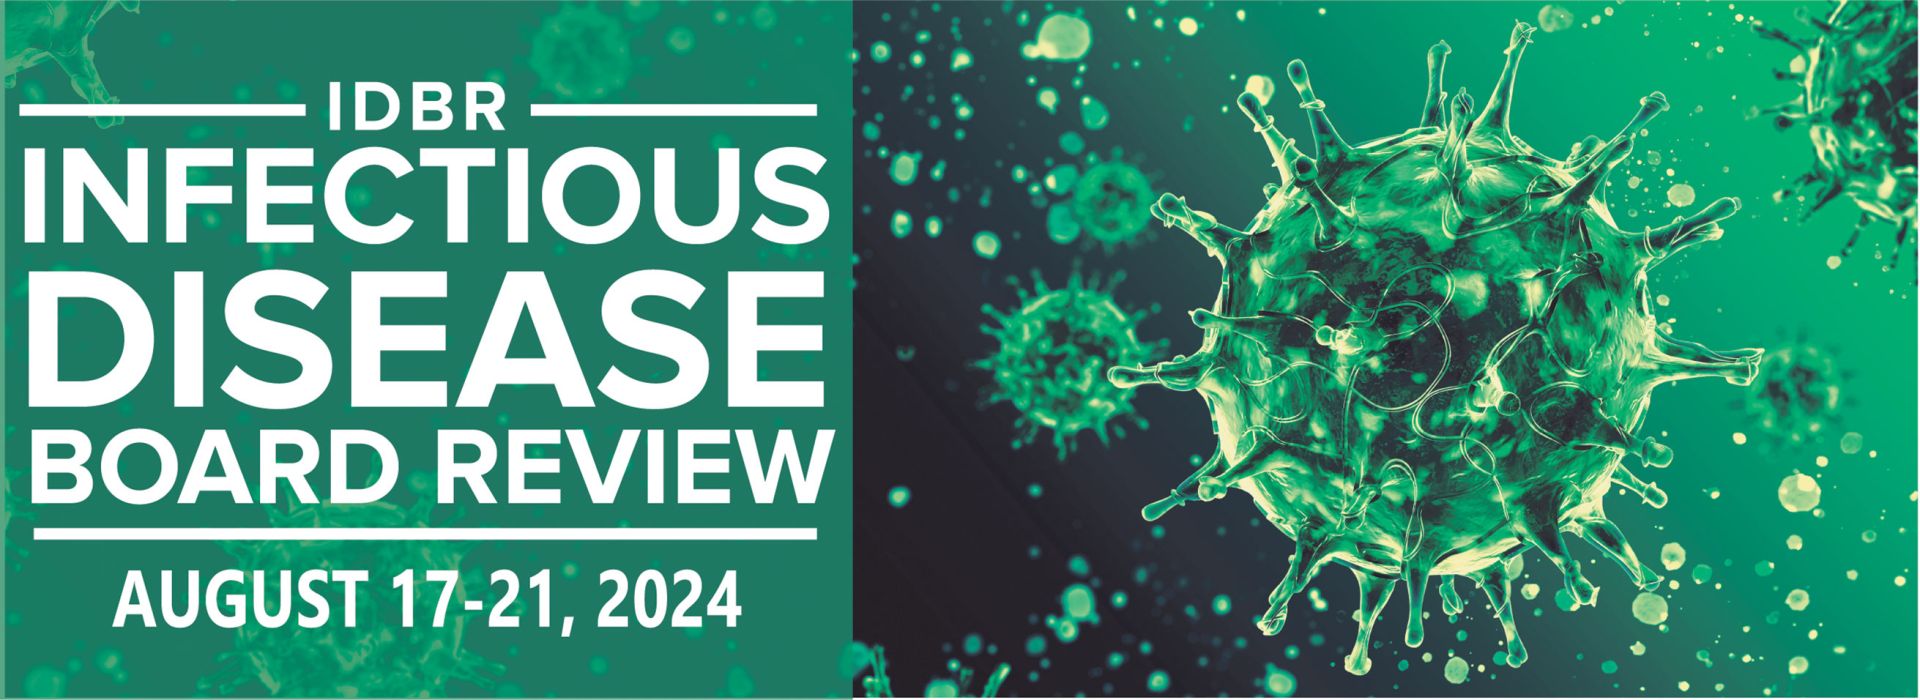 "IDBR Infectious Disease Board Review August 17-21, 2024" | Virus Cells